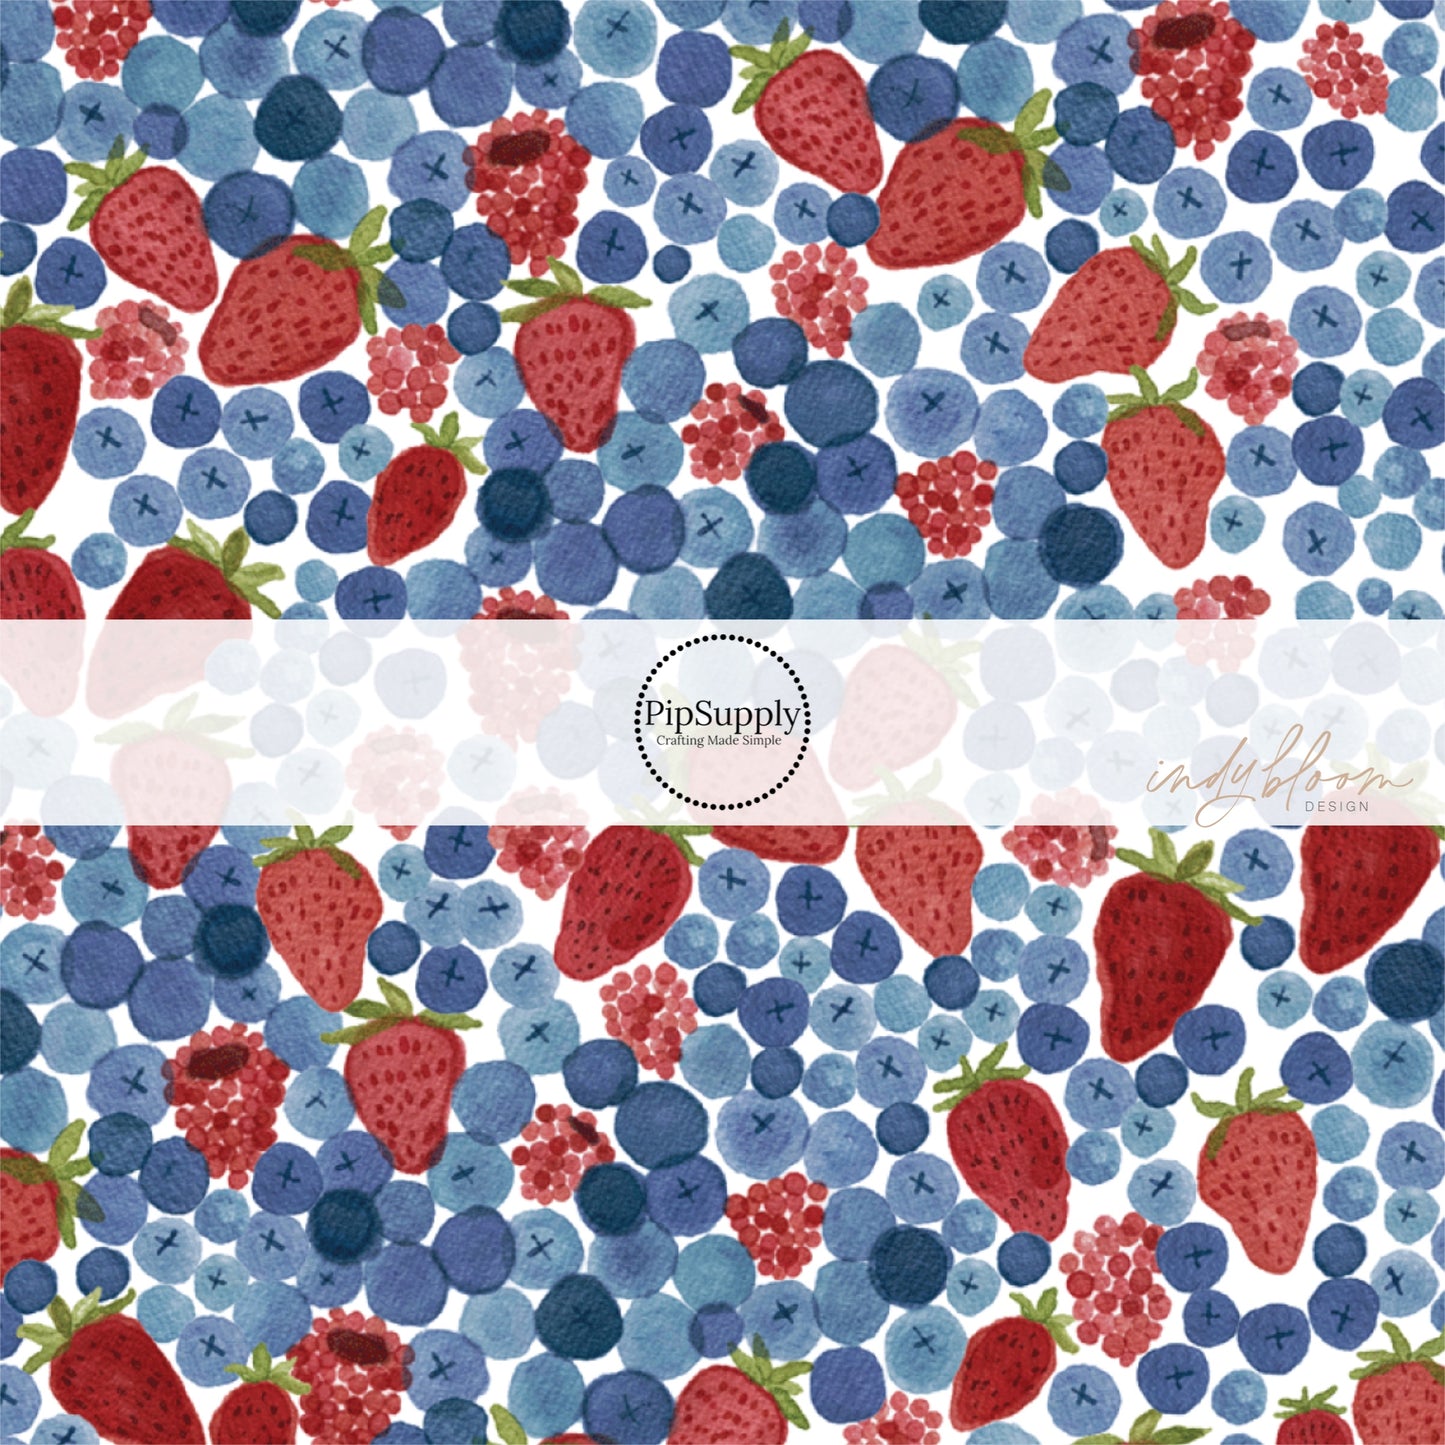 Blueberry, raspberry, and Strawberry fruit themed fourth of July fabric by the yard.